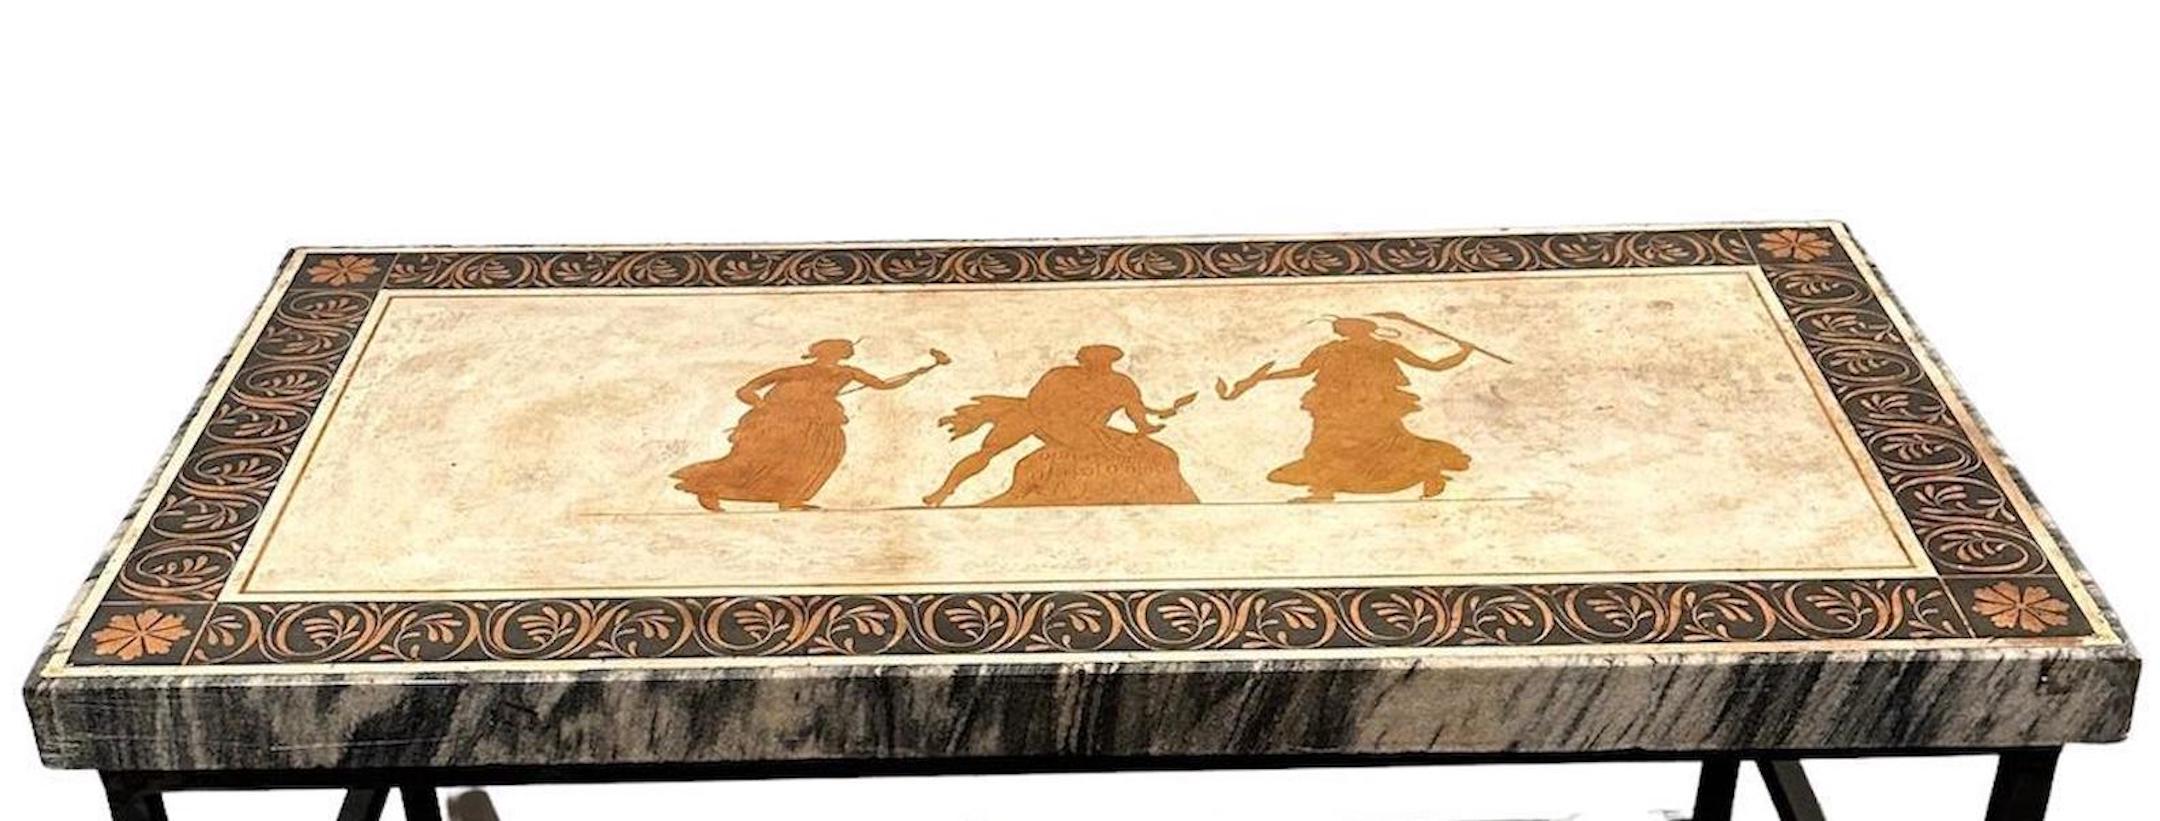 An antique, marble trimmed, inlaid scagliola table top depicting Greek mythology figures on an iron base of a later date.